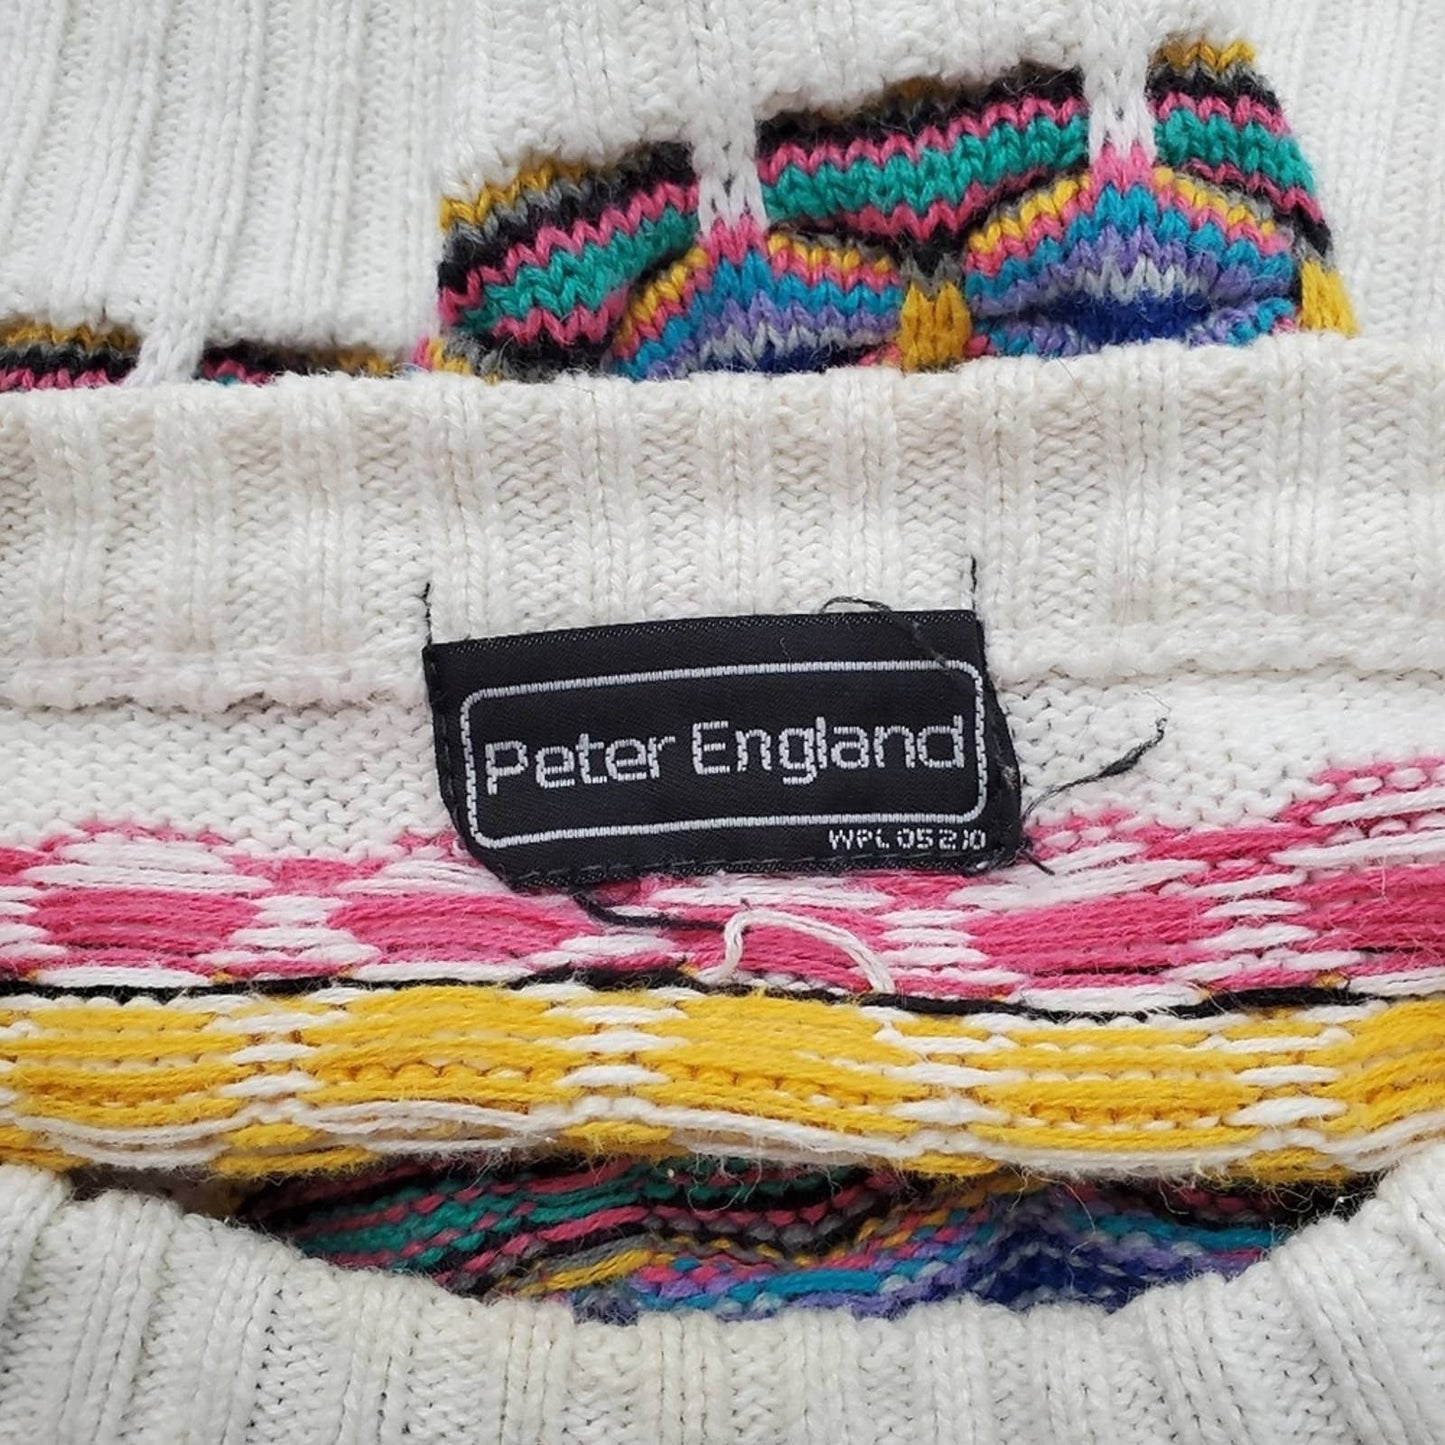 Vintage 90s Chunky Knit Sweater by Peter England - L